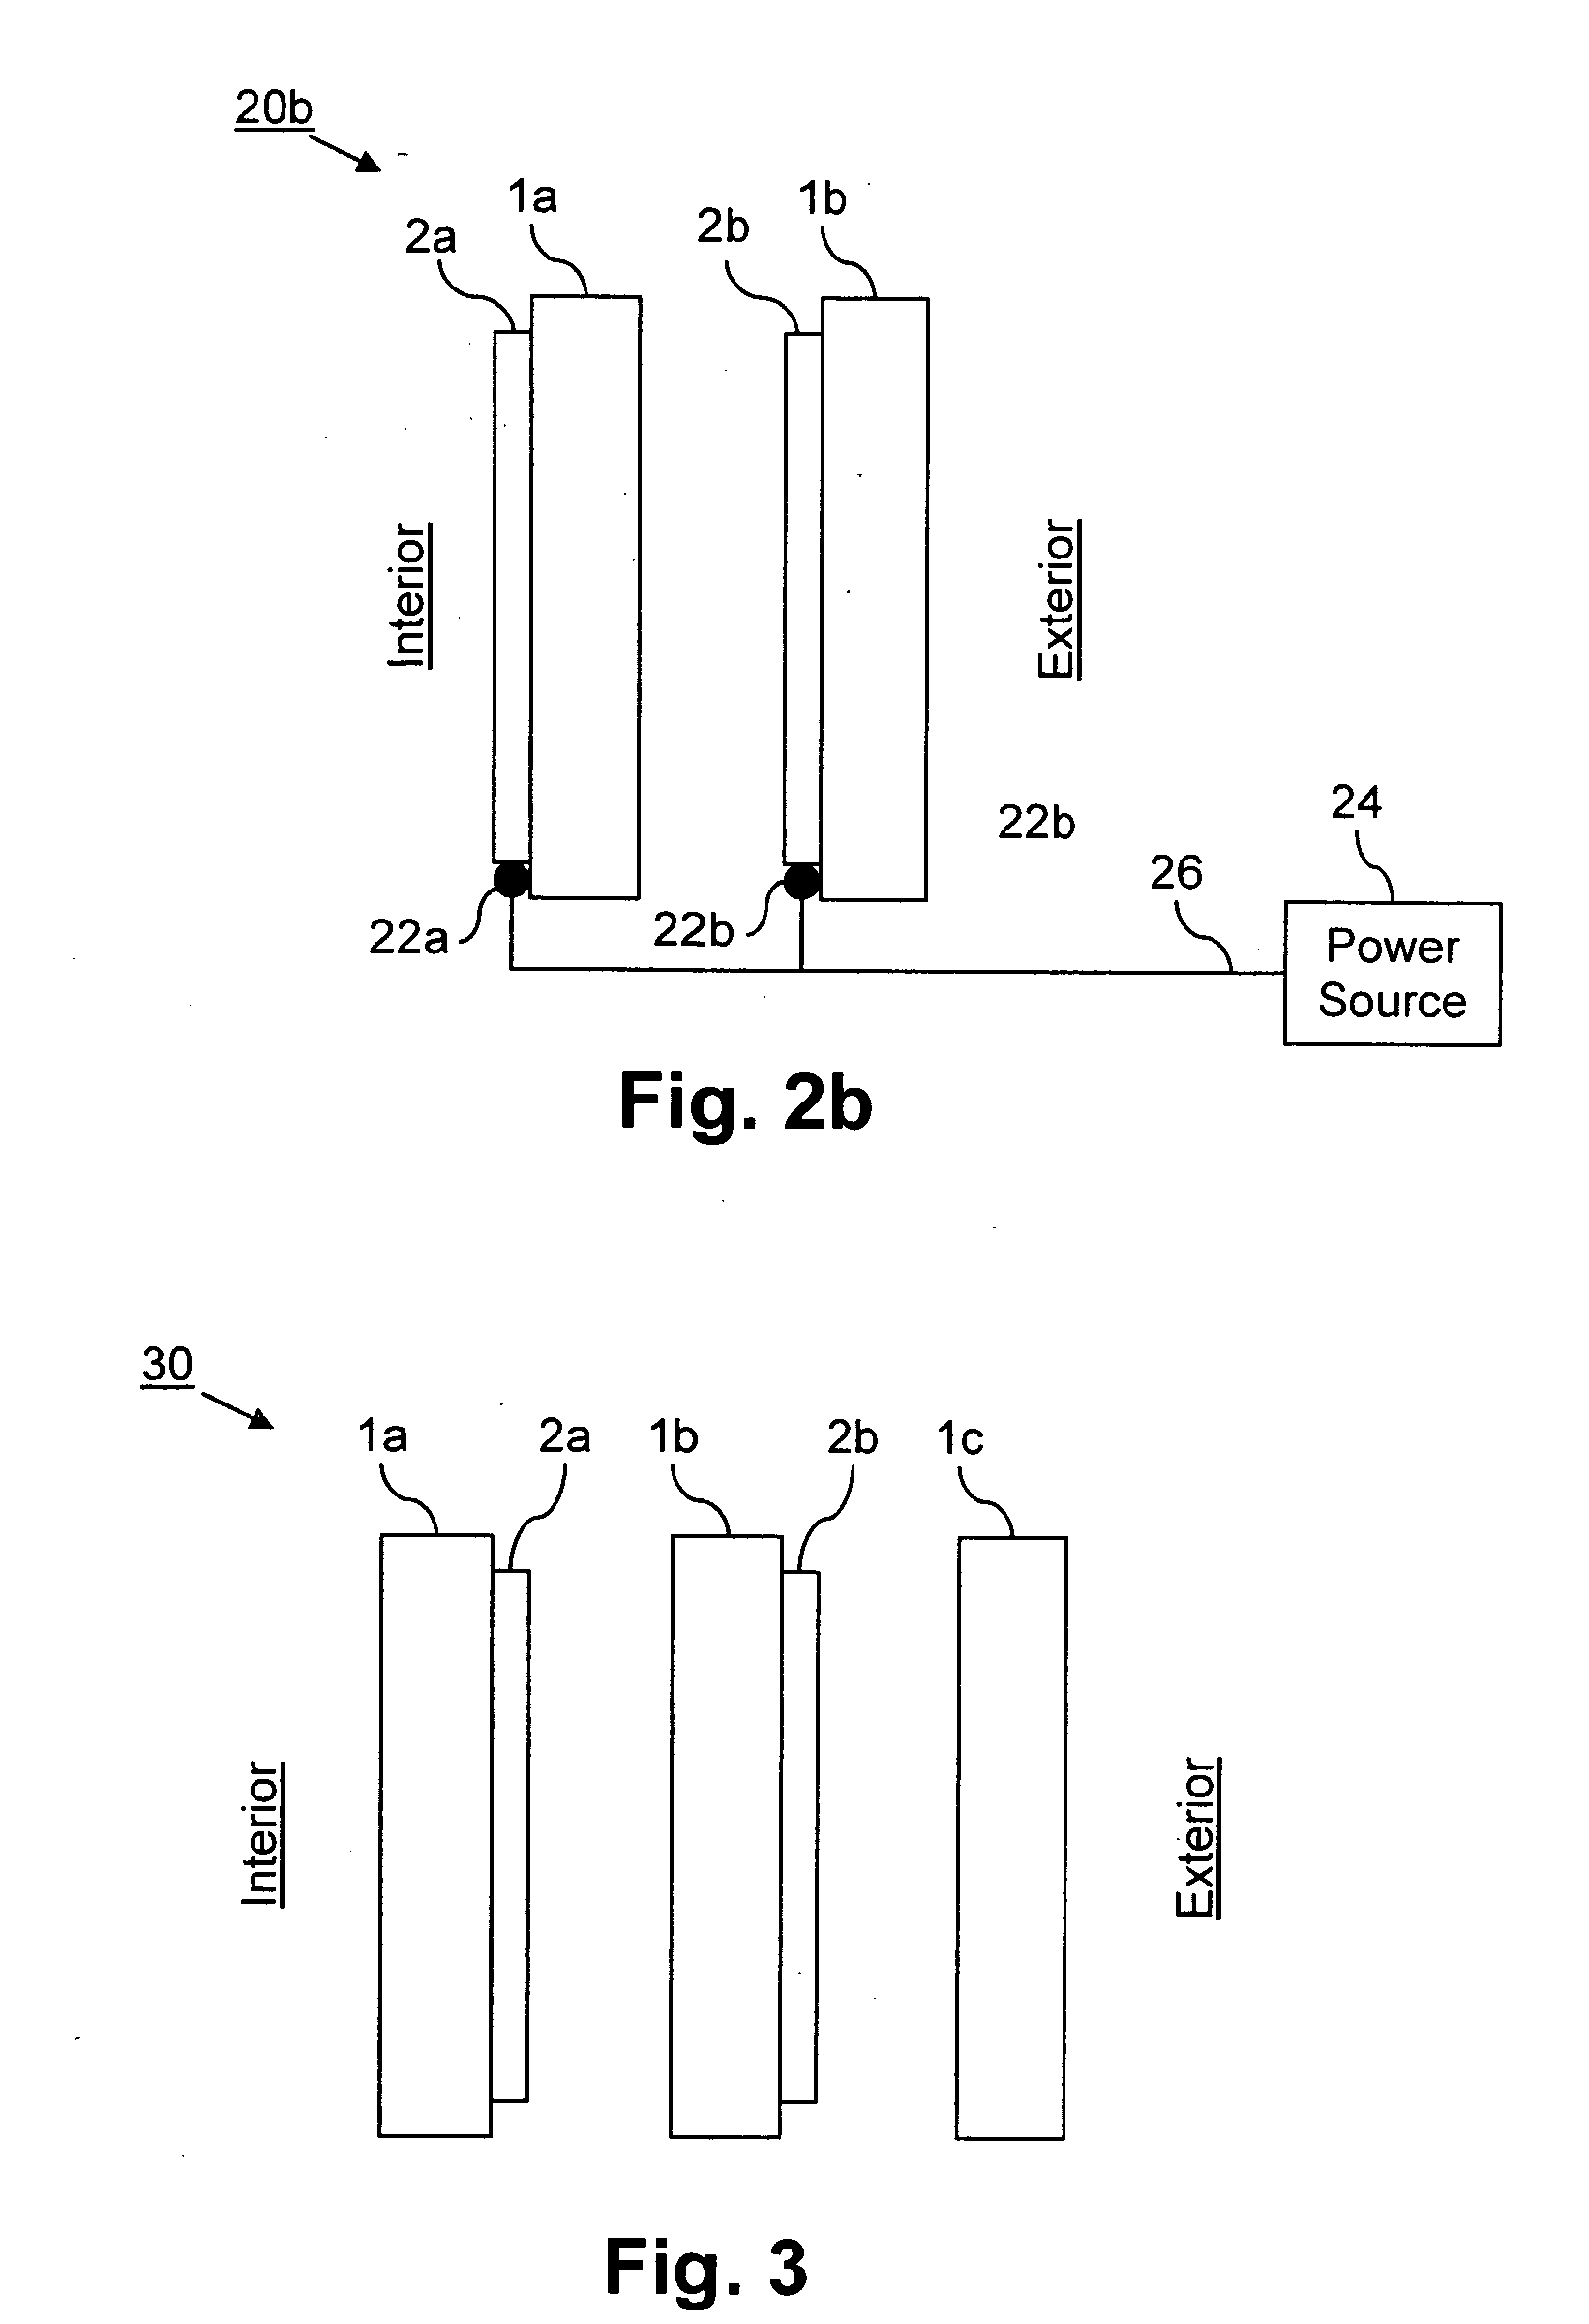 Coated article with sputter-deposited transparent conductive coating for refrigeration/freezer units, and method of making the same